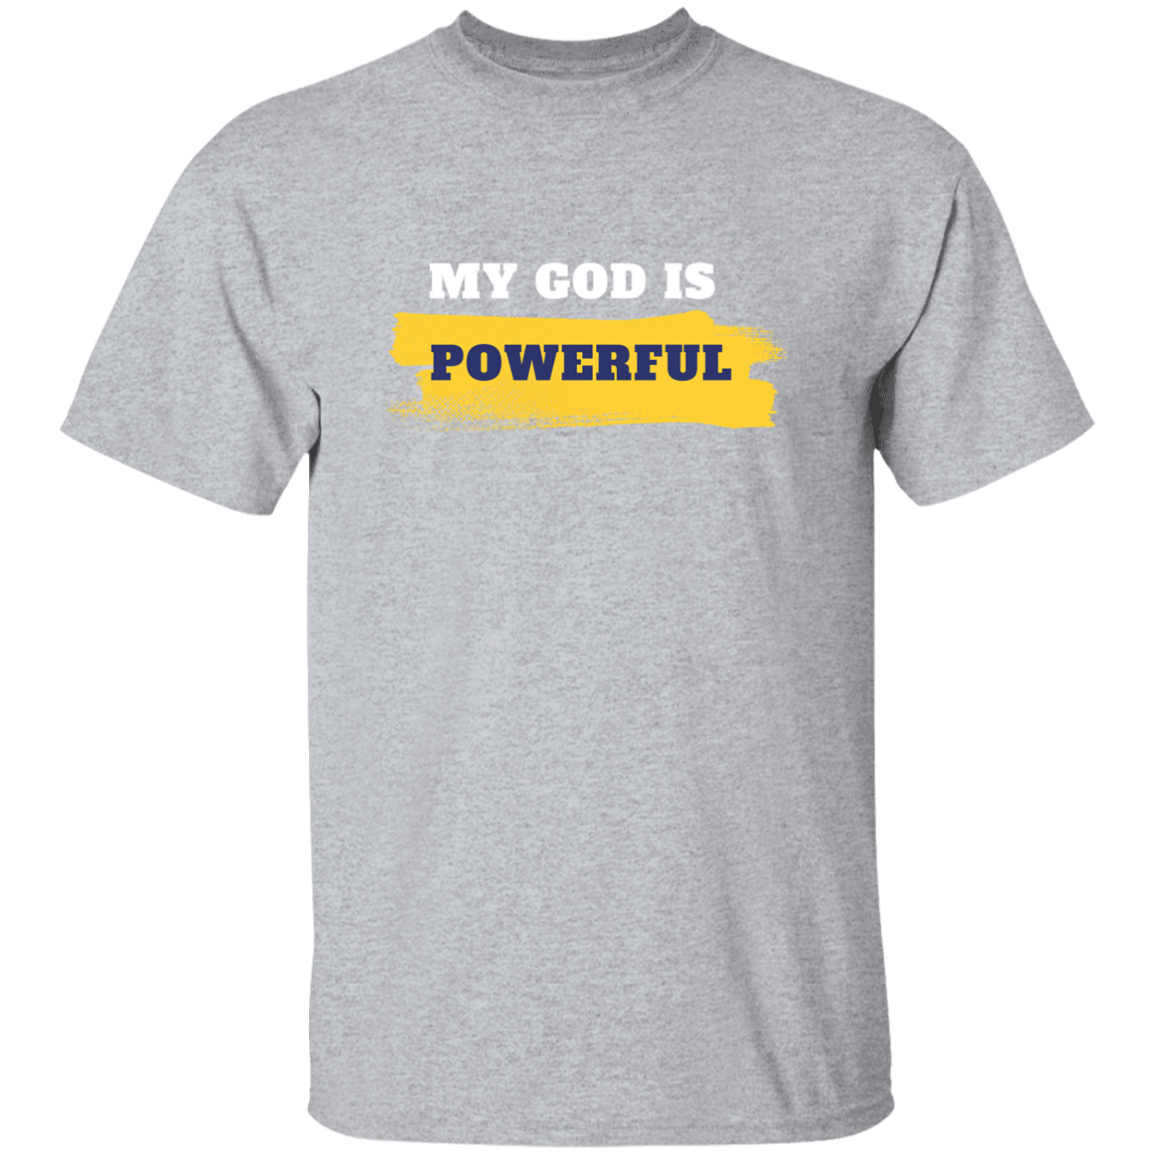 Christian T-Shirt | My God is Powerful | Assorted Colors